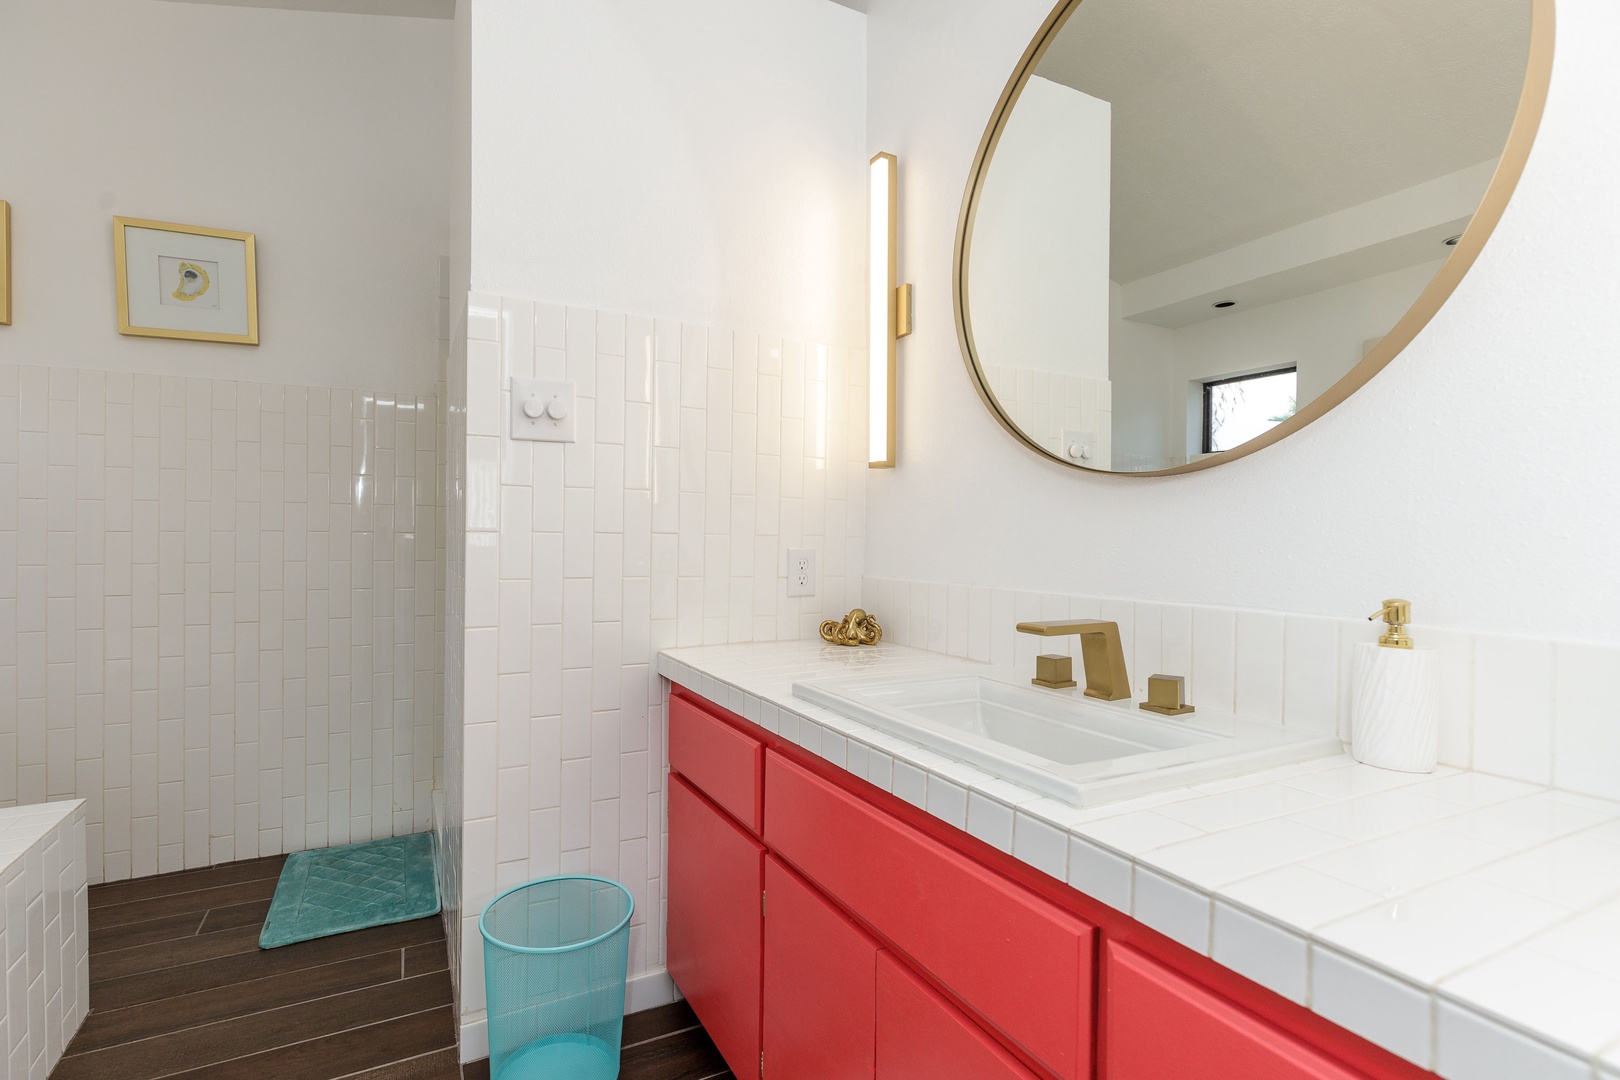 The king en suite offers a large single vanity, shower, & luxurious soaking tub